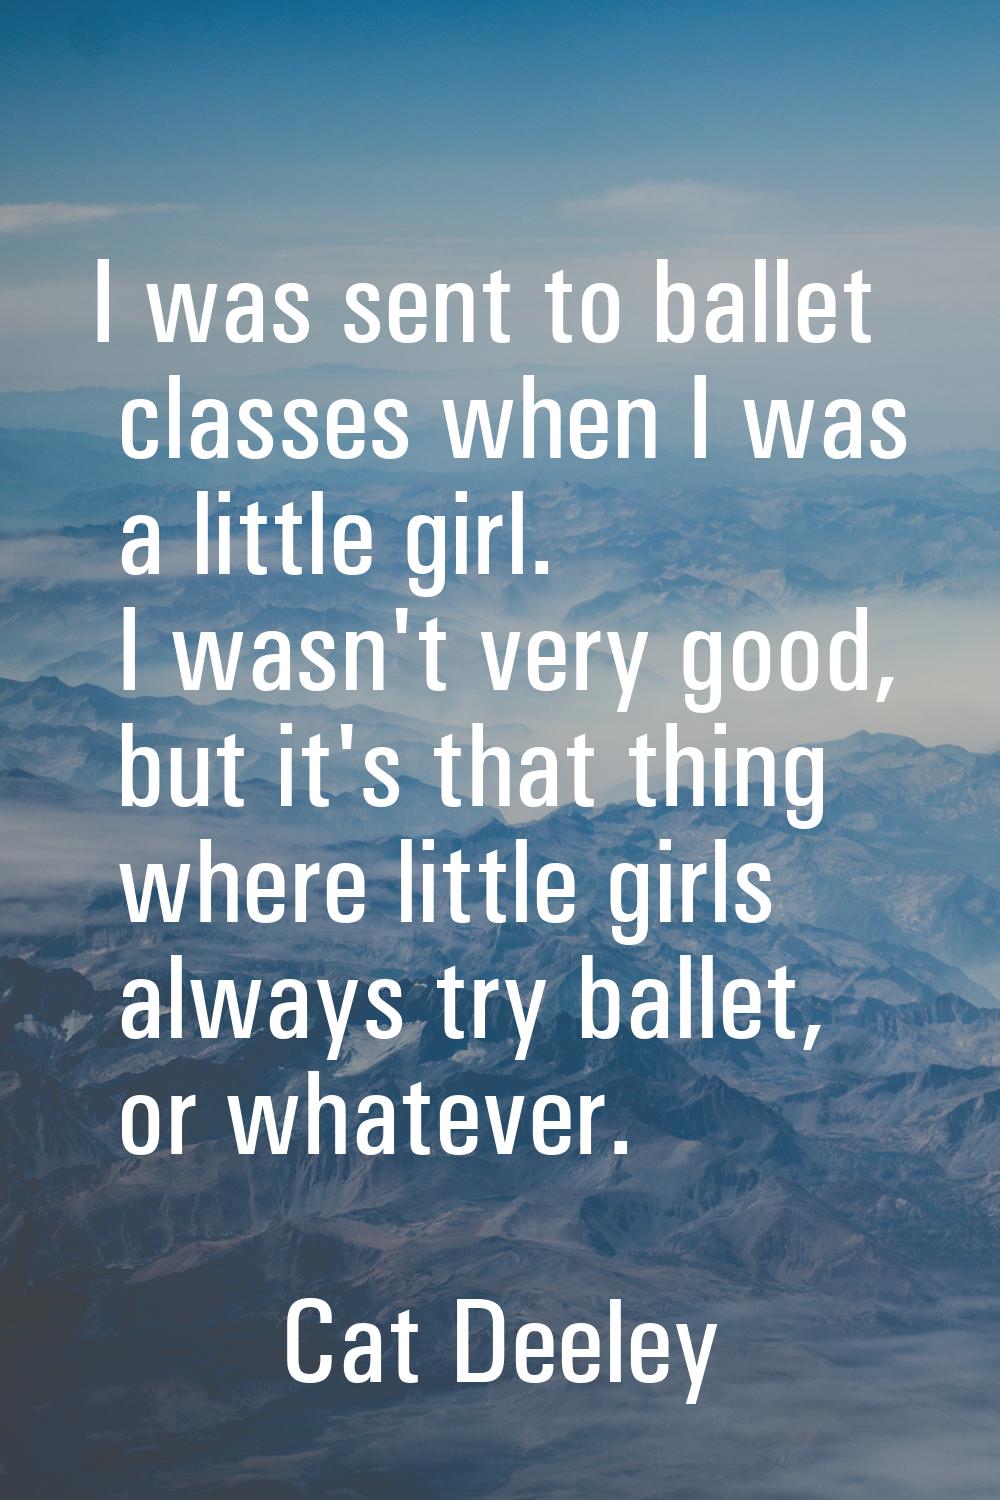 I was sent to ballet classes when I was a little girl. I wasn't very good, but it's that thing wher